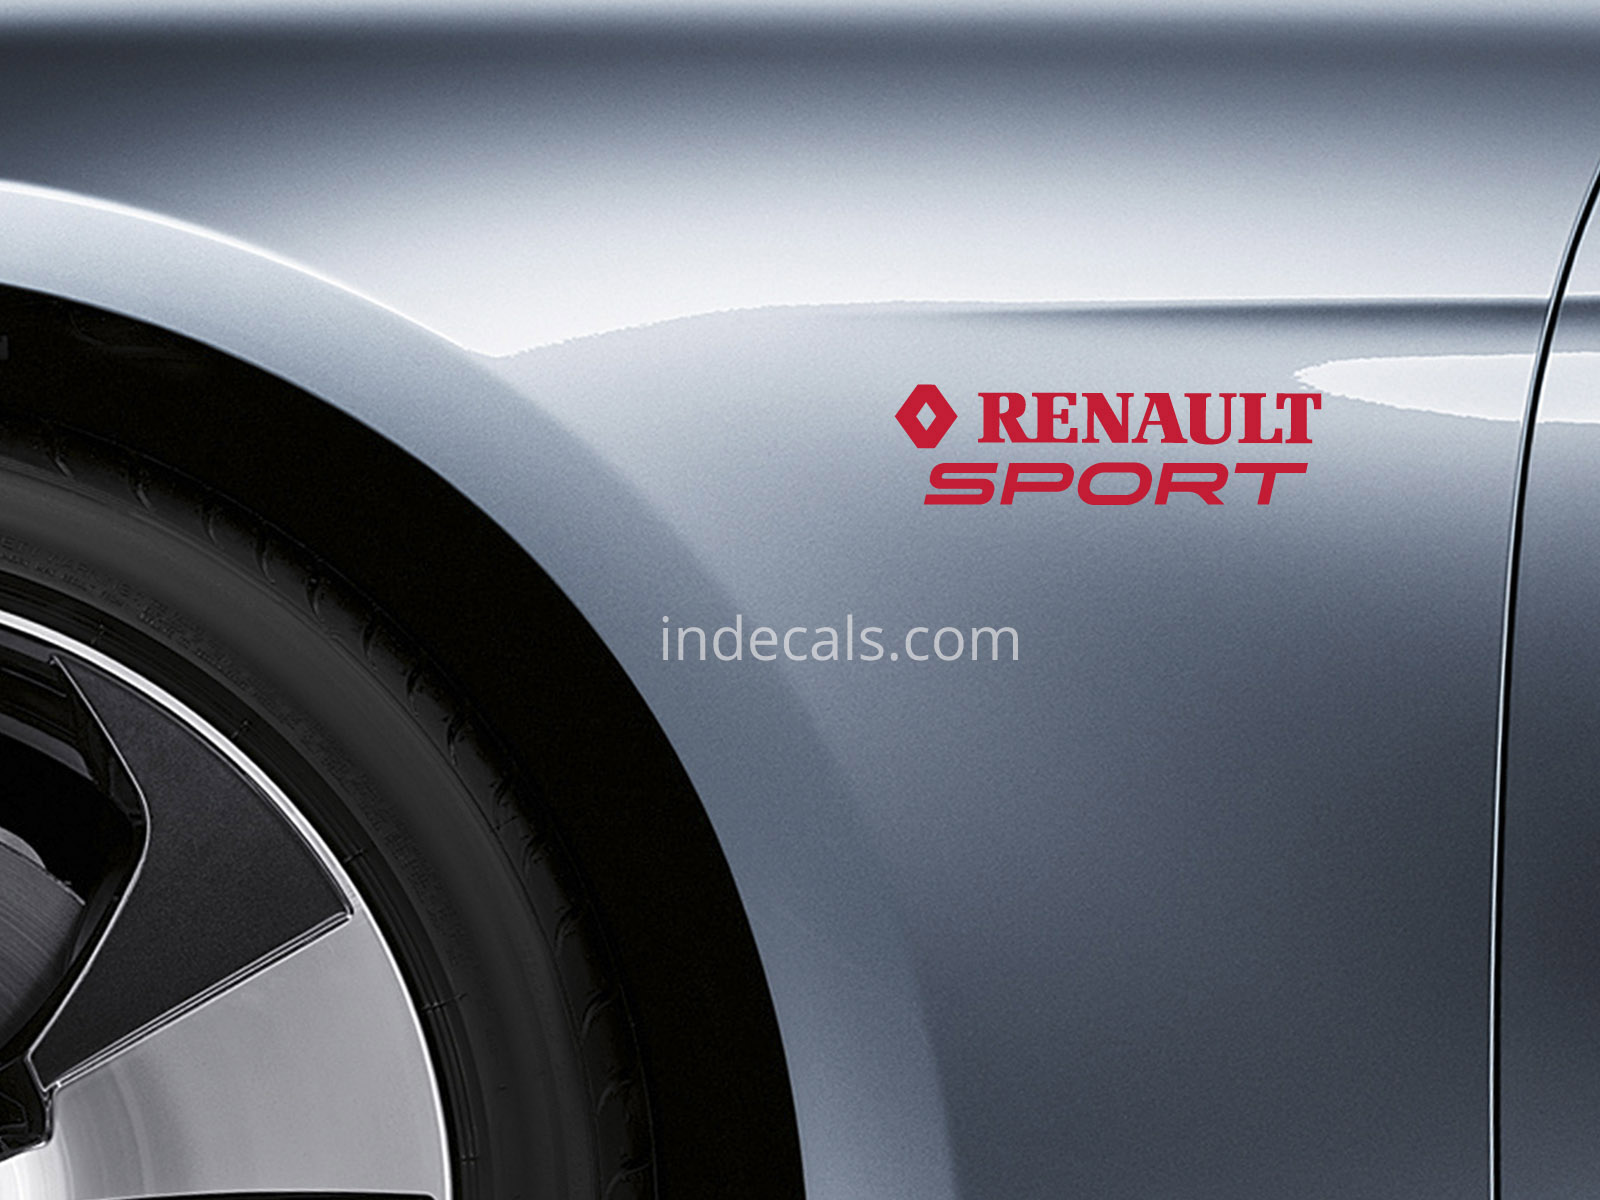 2 x Renault Sports stickers for Wings - Red